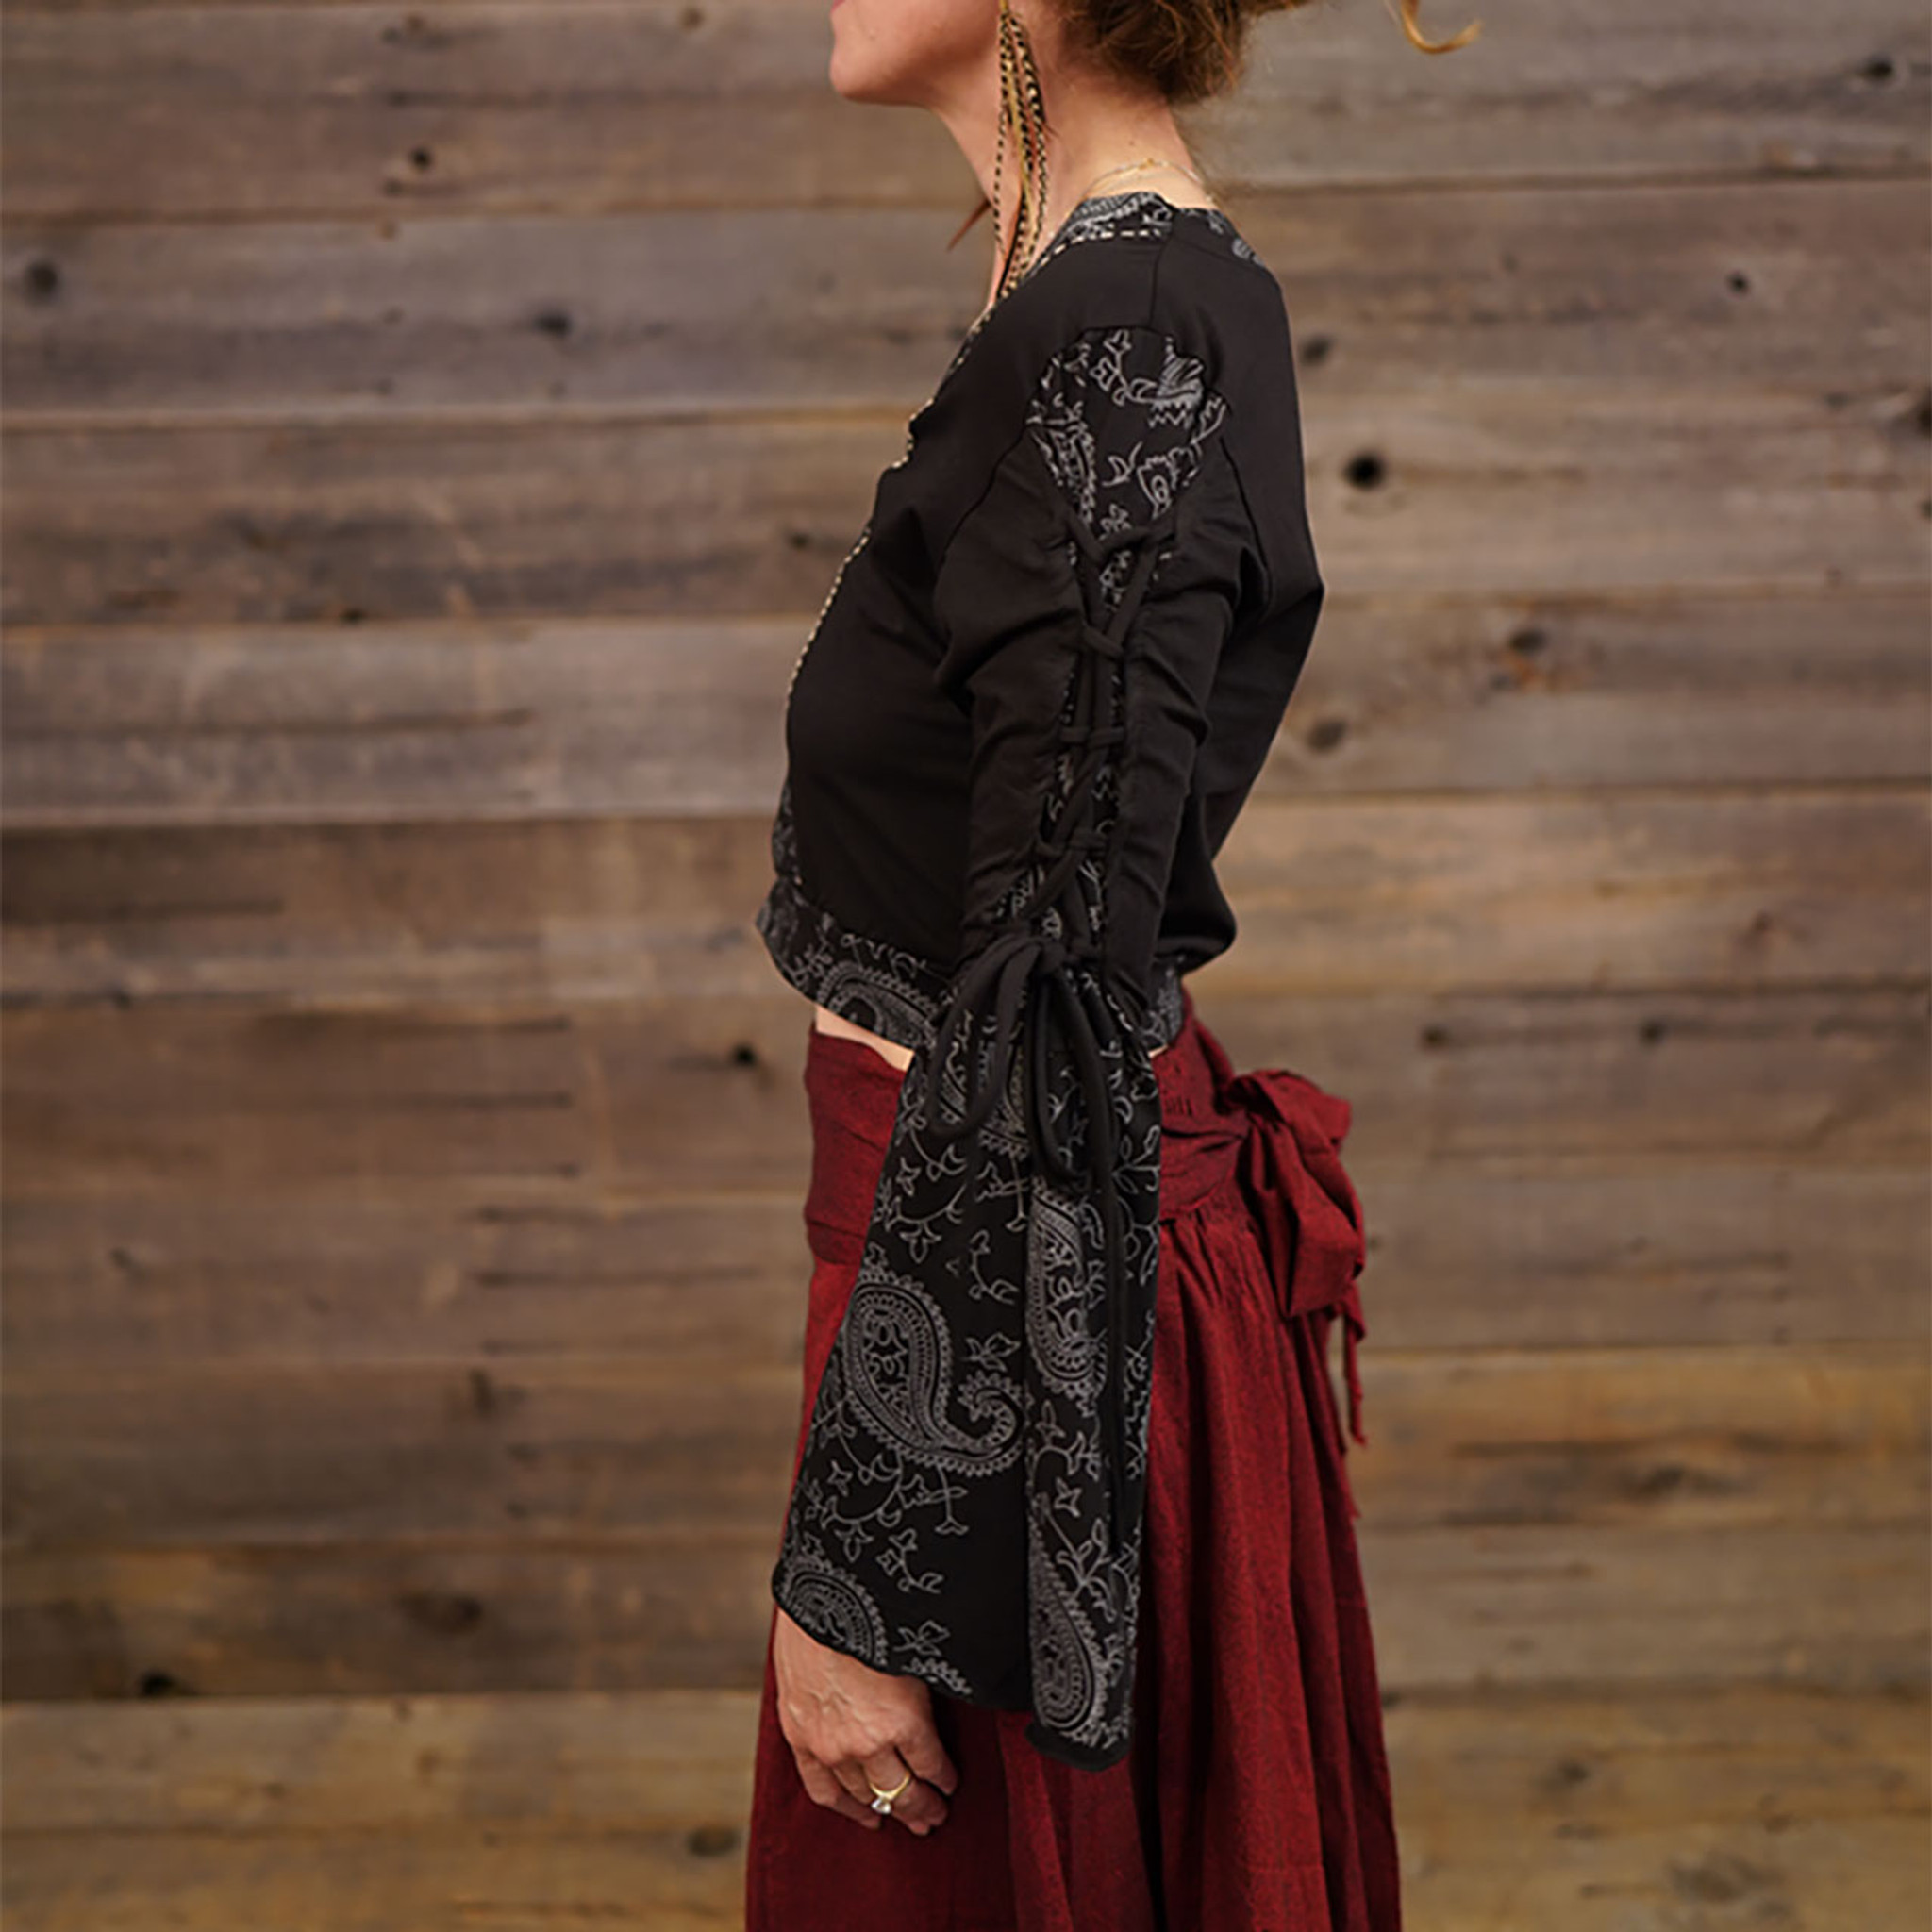 PAISLEY WAY TOP Cotton Lycra Paisley Print Patchwork Long Bell Sleeve w/ Braids Short Top w/ Hand Stitching